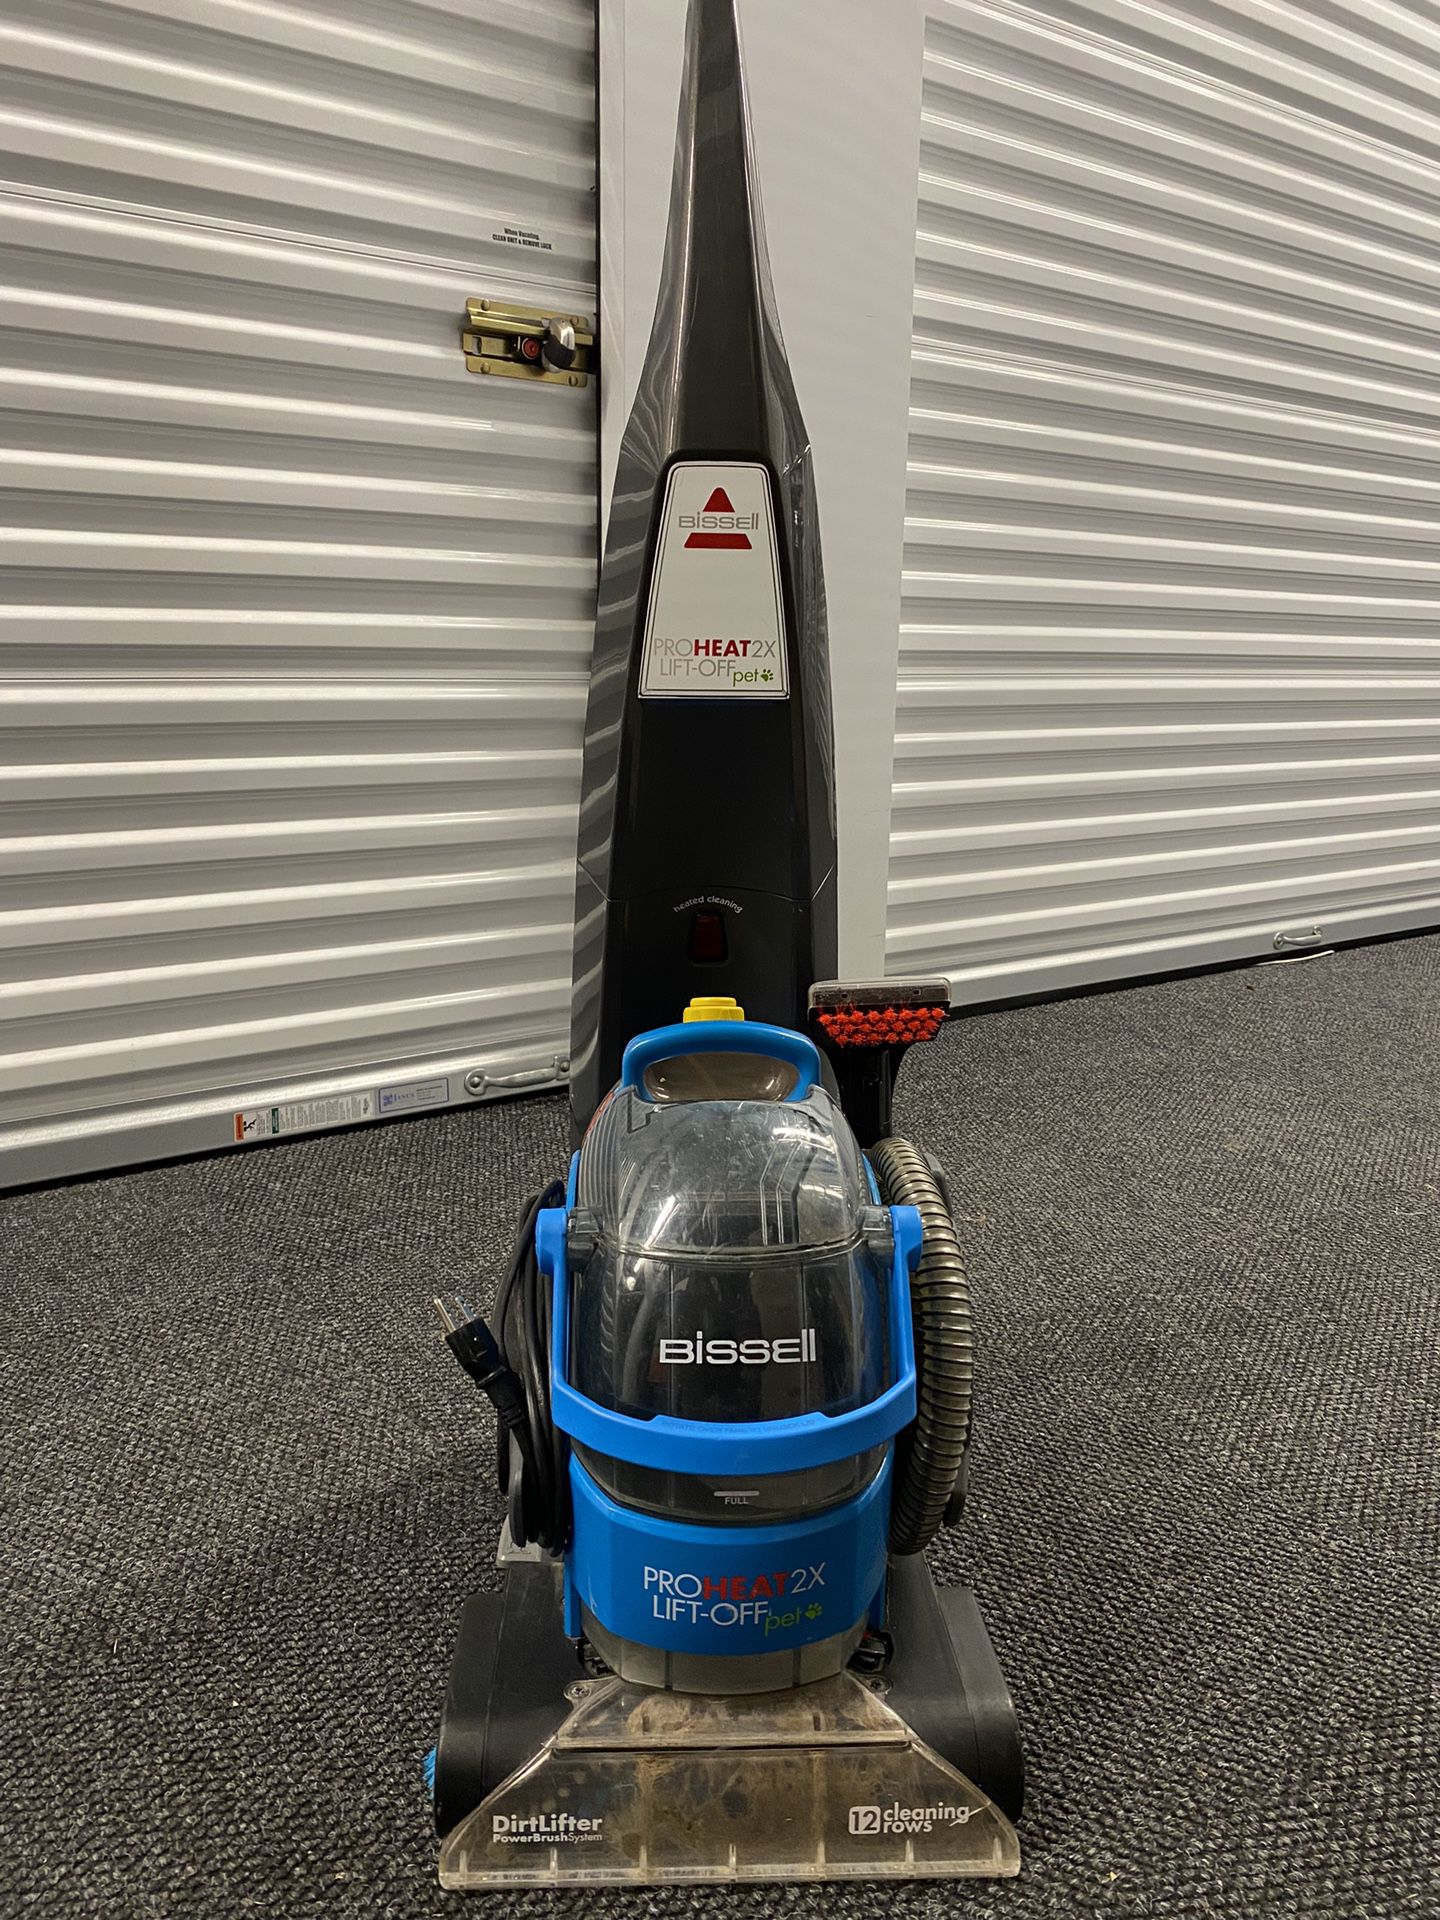 BISSELL ProHeat 2X Lift-Off Upright Carpet Cleaner Vacuum - Pet